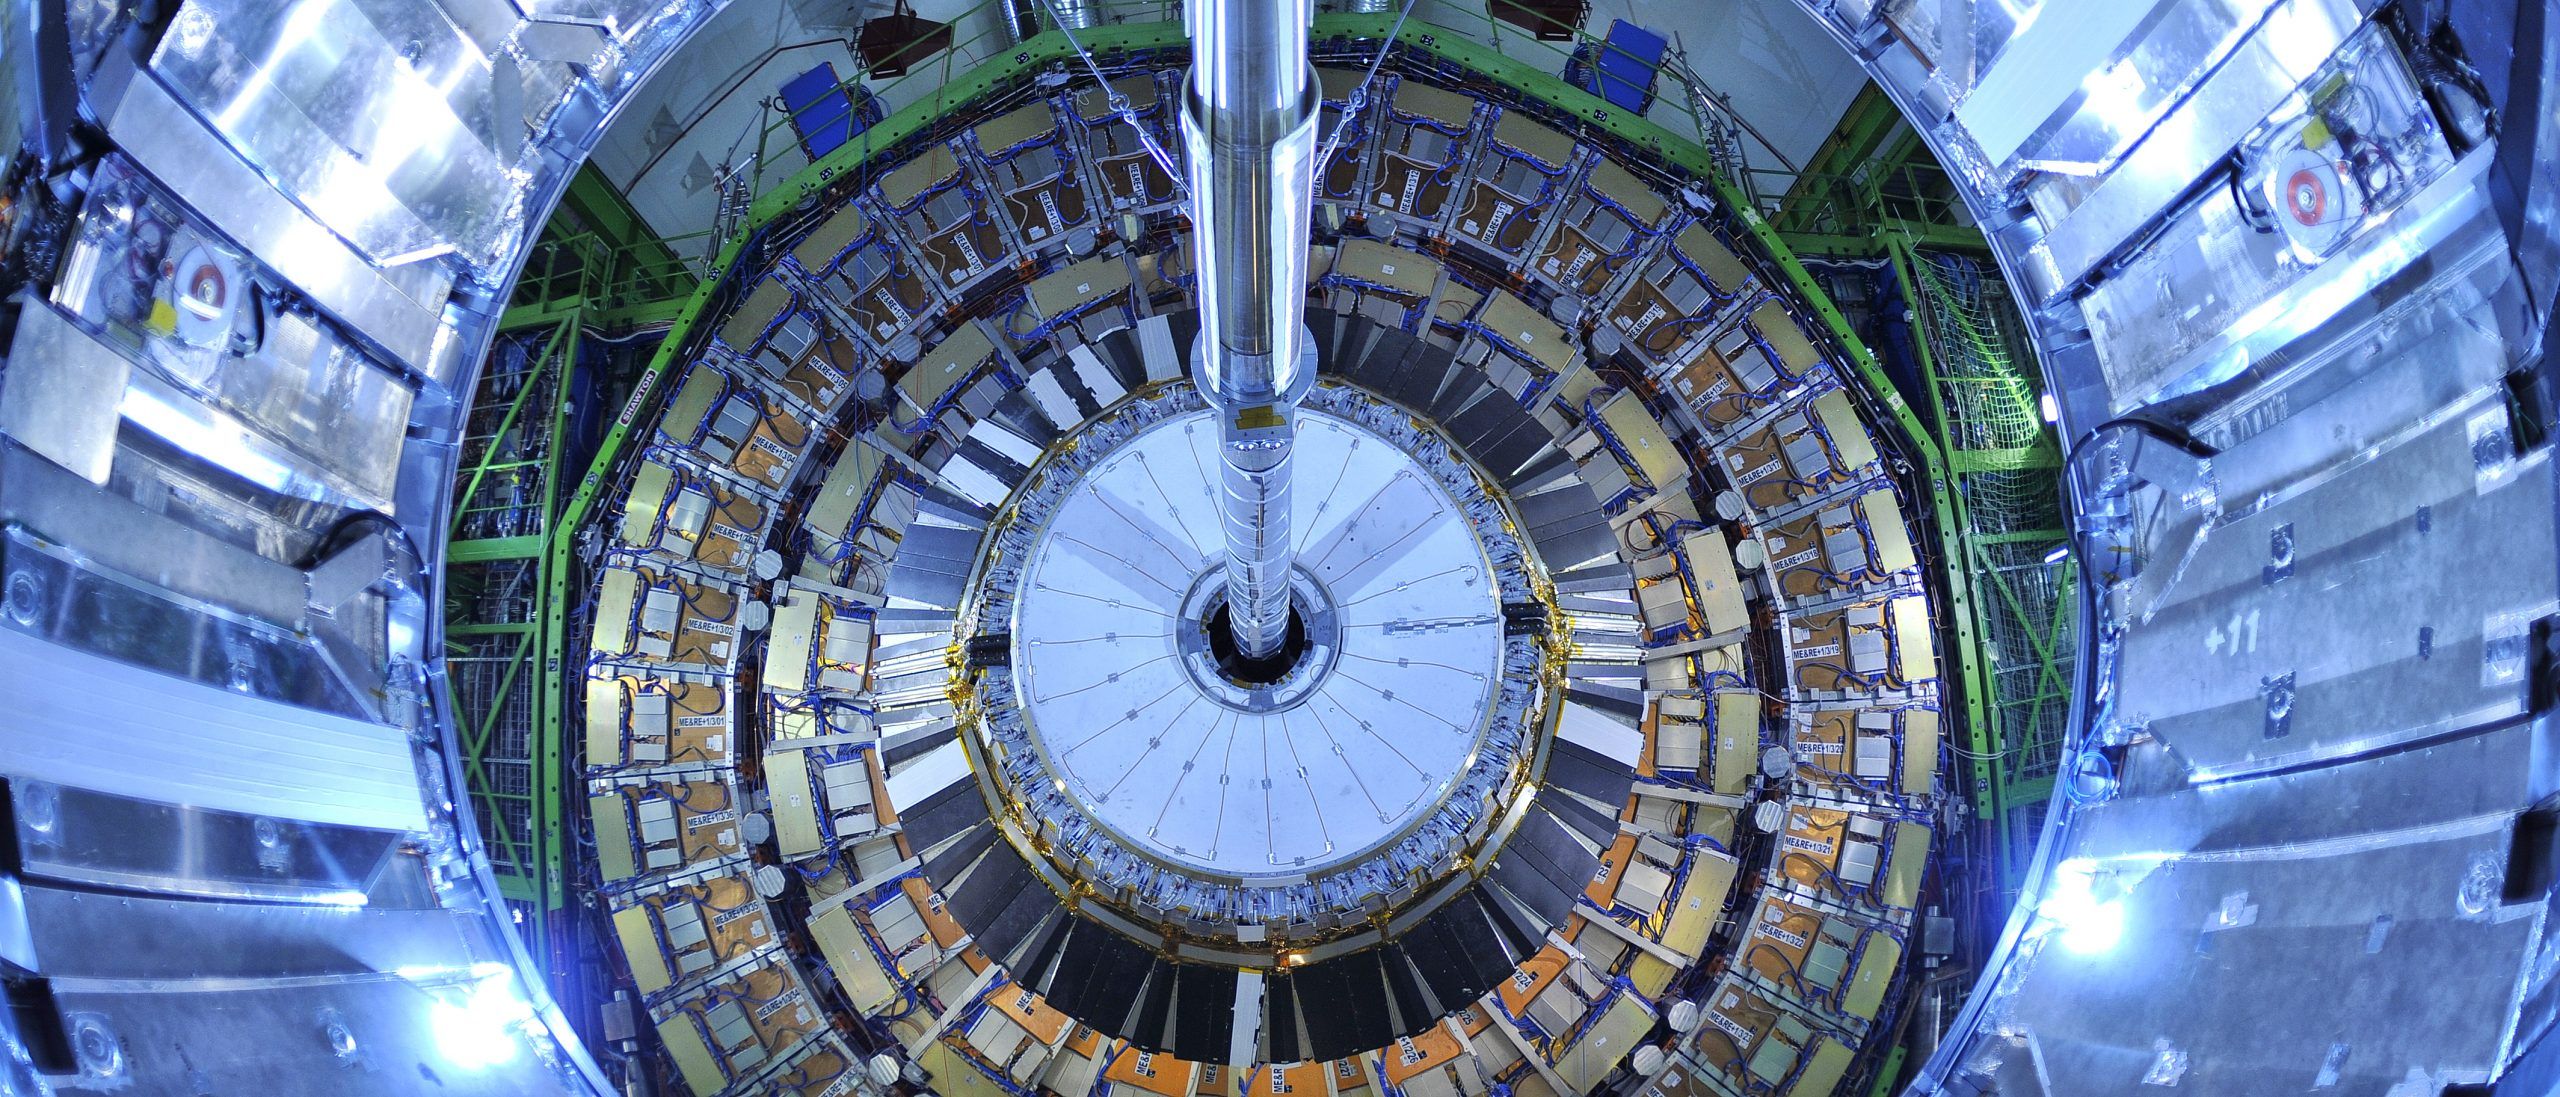 CERN has announced the development of a project for the study of multiverses and the test of hypothesis related to multiverses